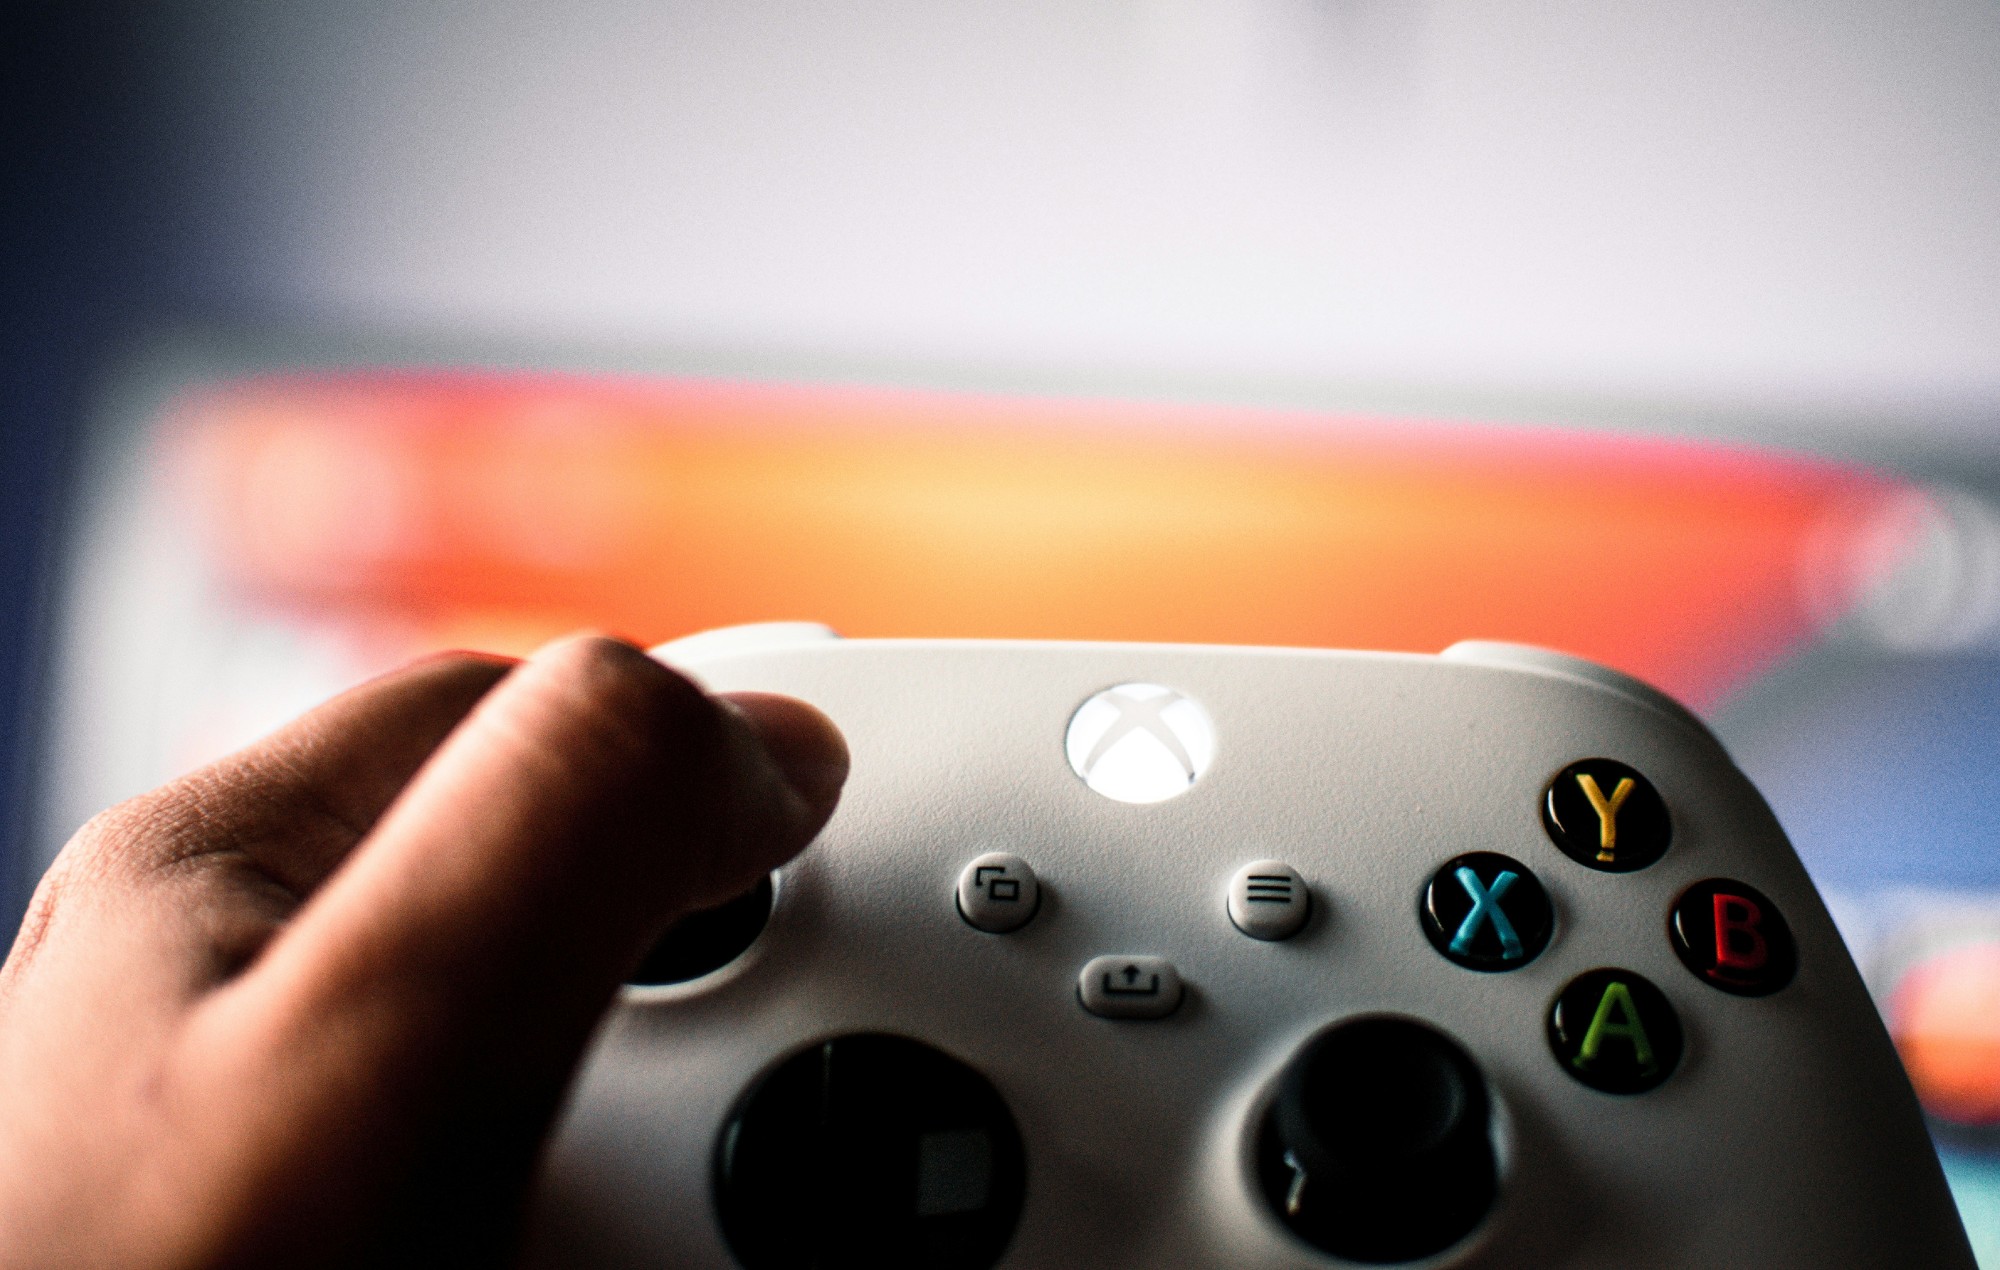 Xbox servers hit by “major outage”